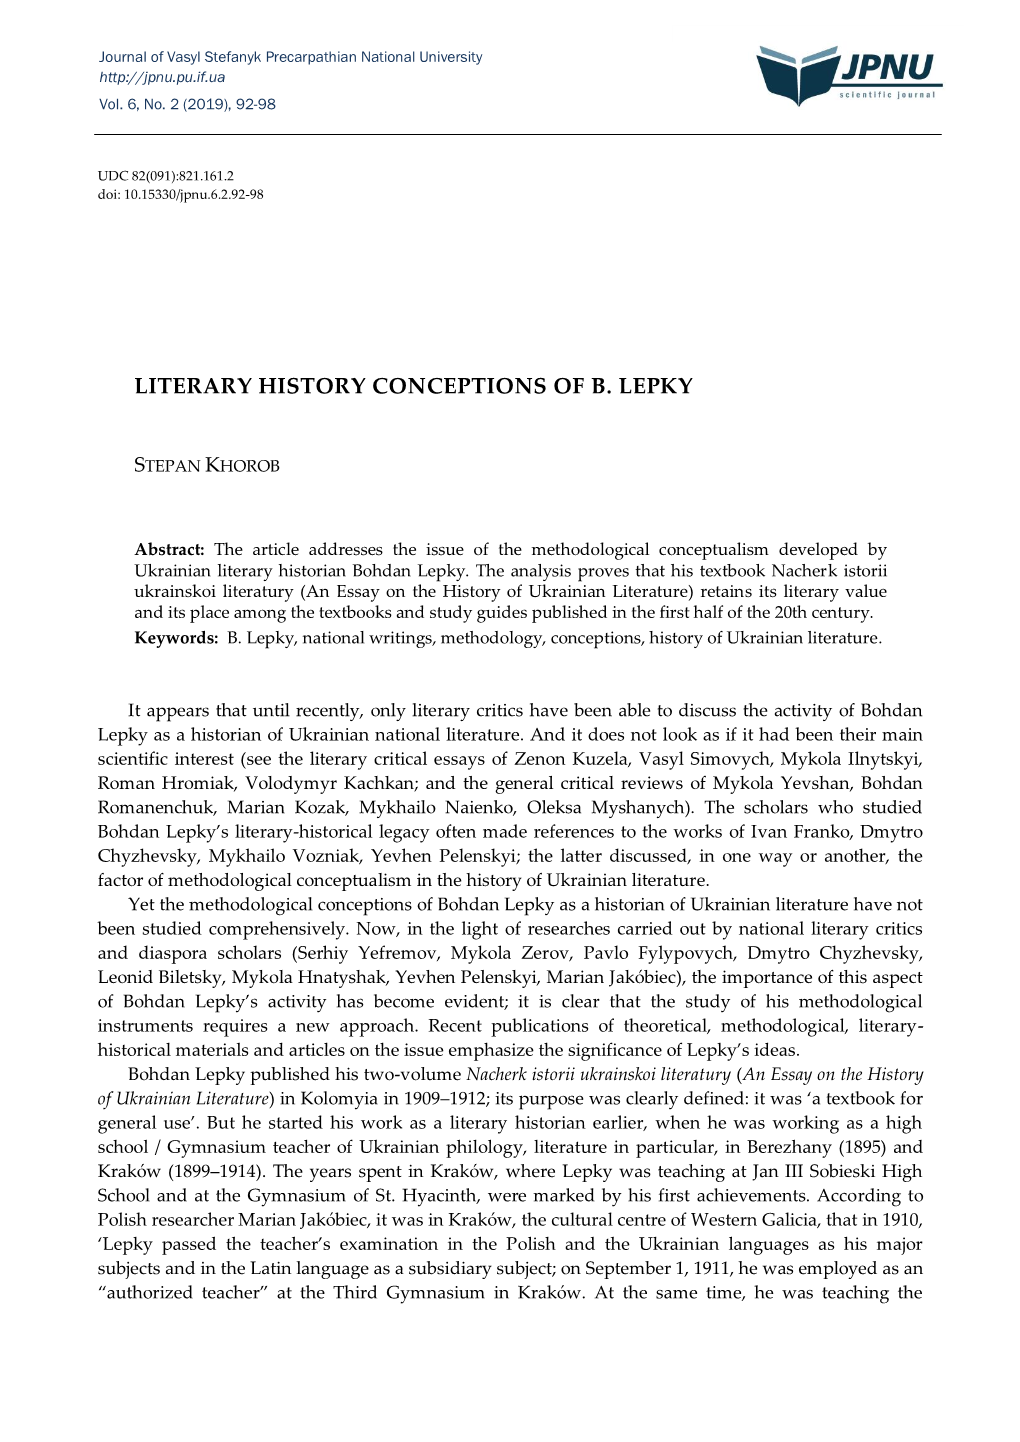 Literary History Conceptions of B